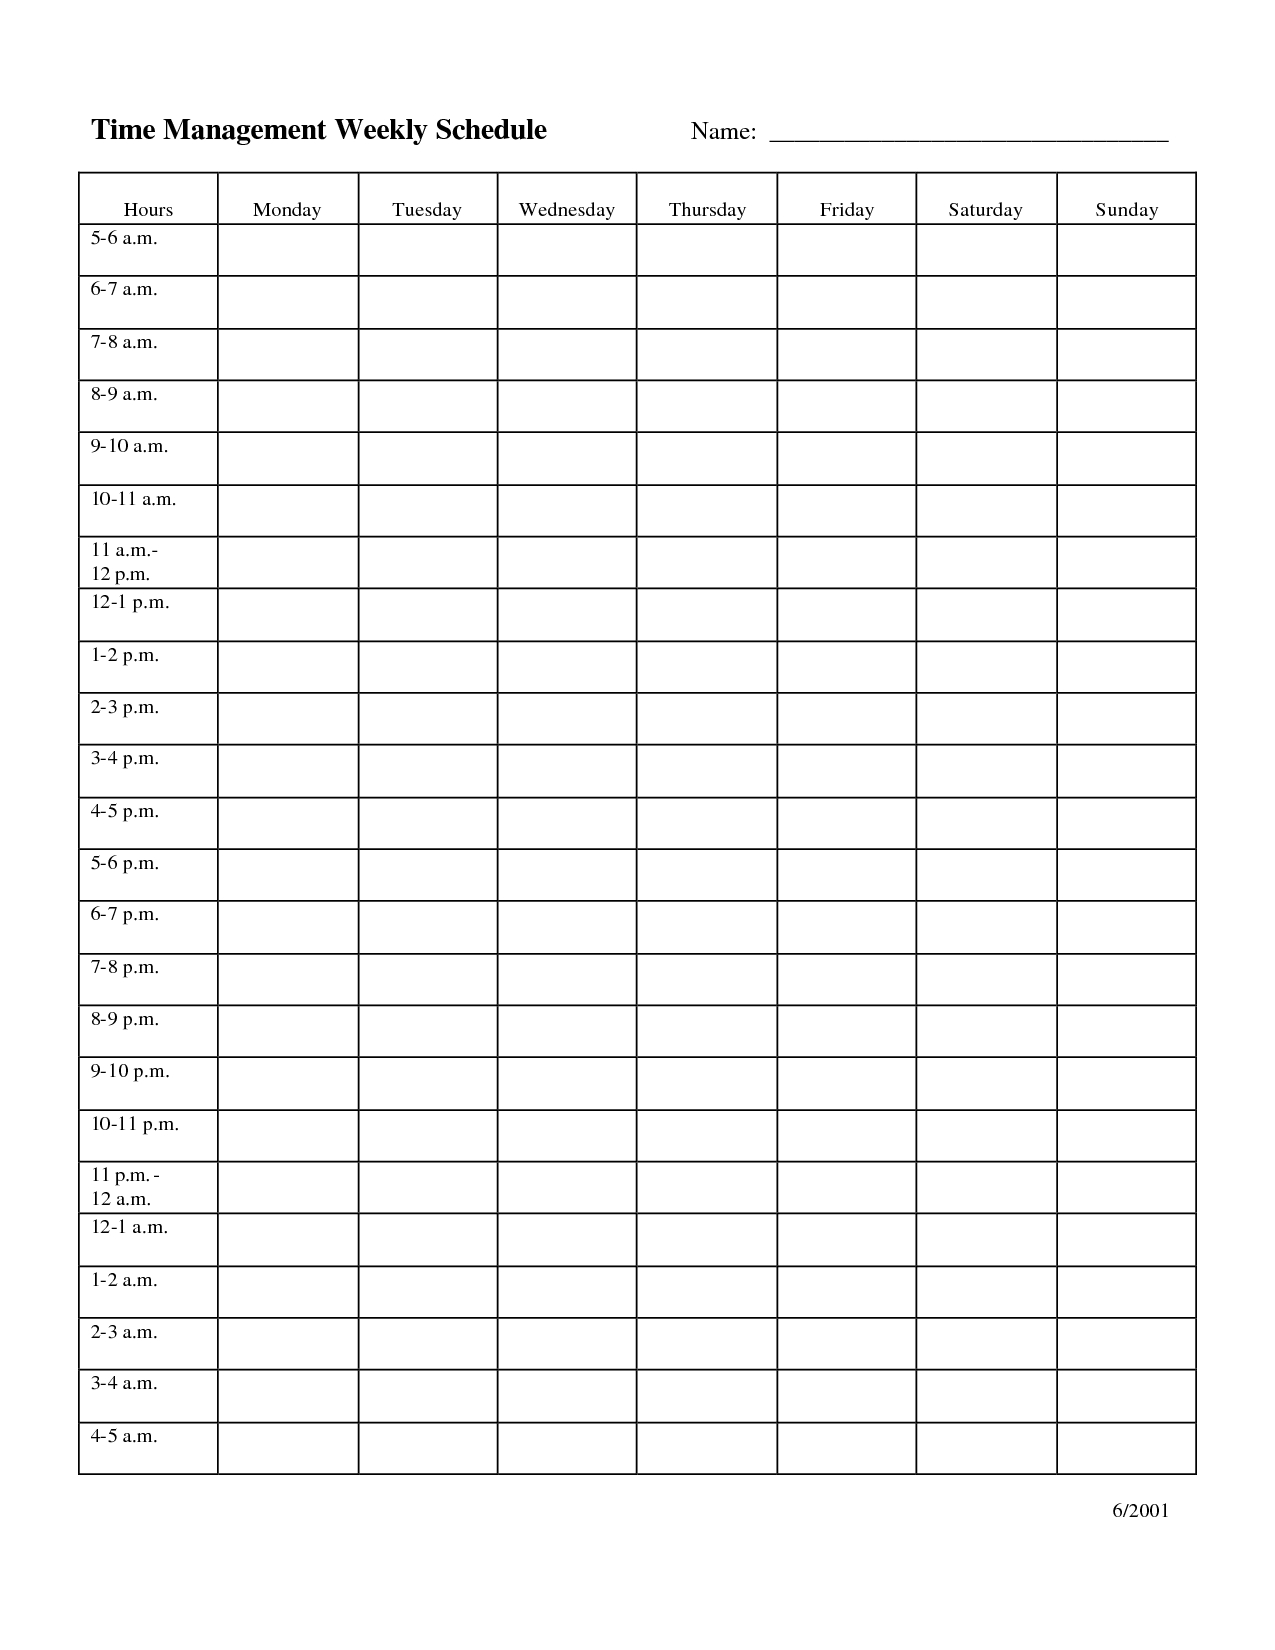 Time Hedule Template Project Plan Excel Free Download Planner - Time Management Forms Free Printable